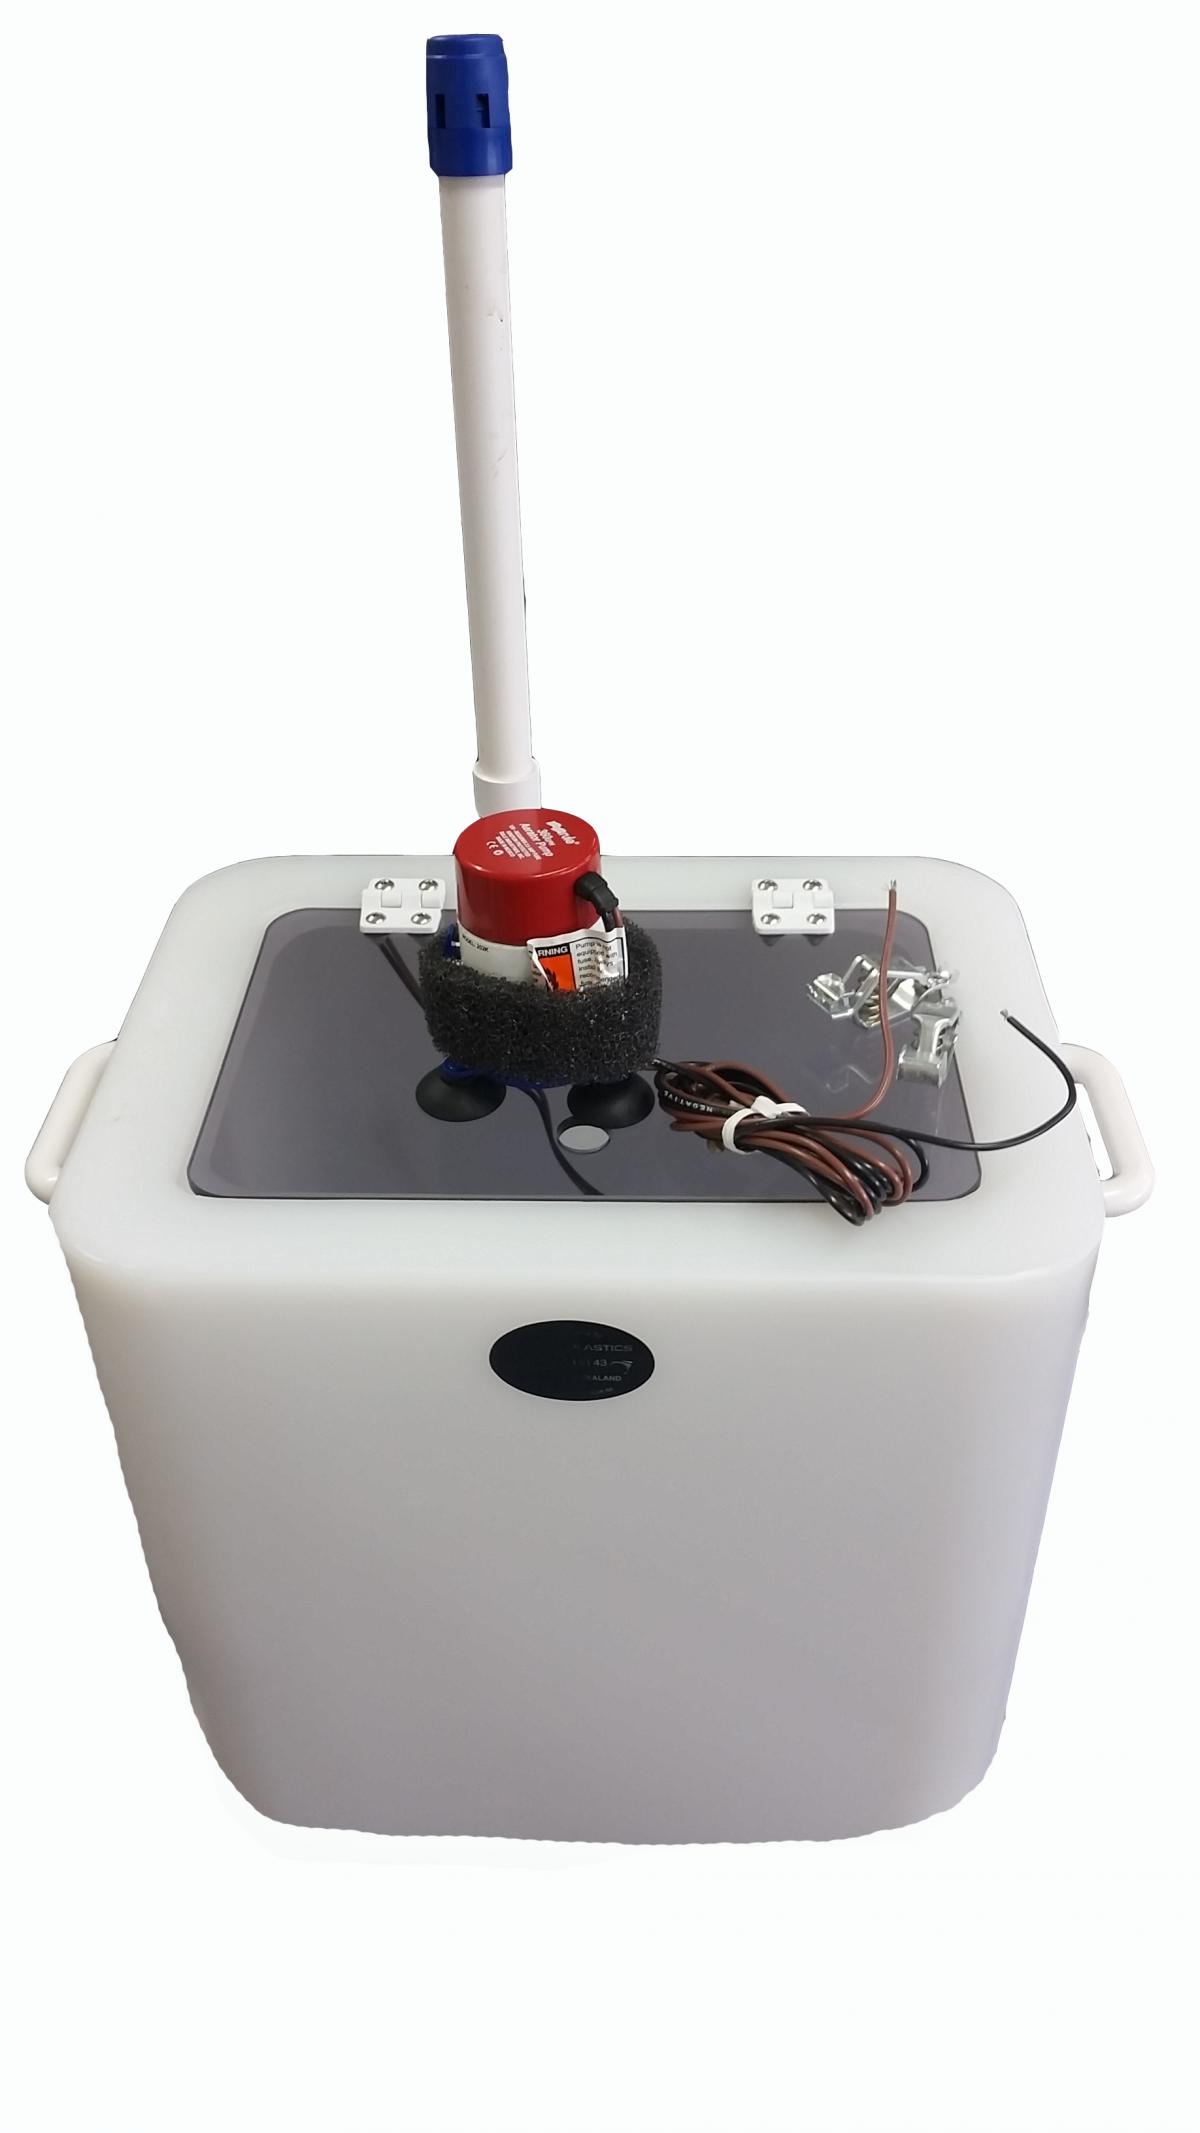 Live Bait Tanks 30Ltr - Your local for Marine chandlery and expert